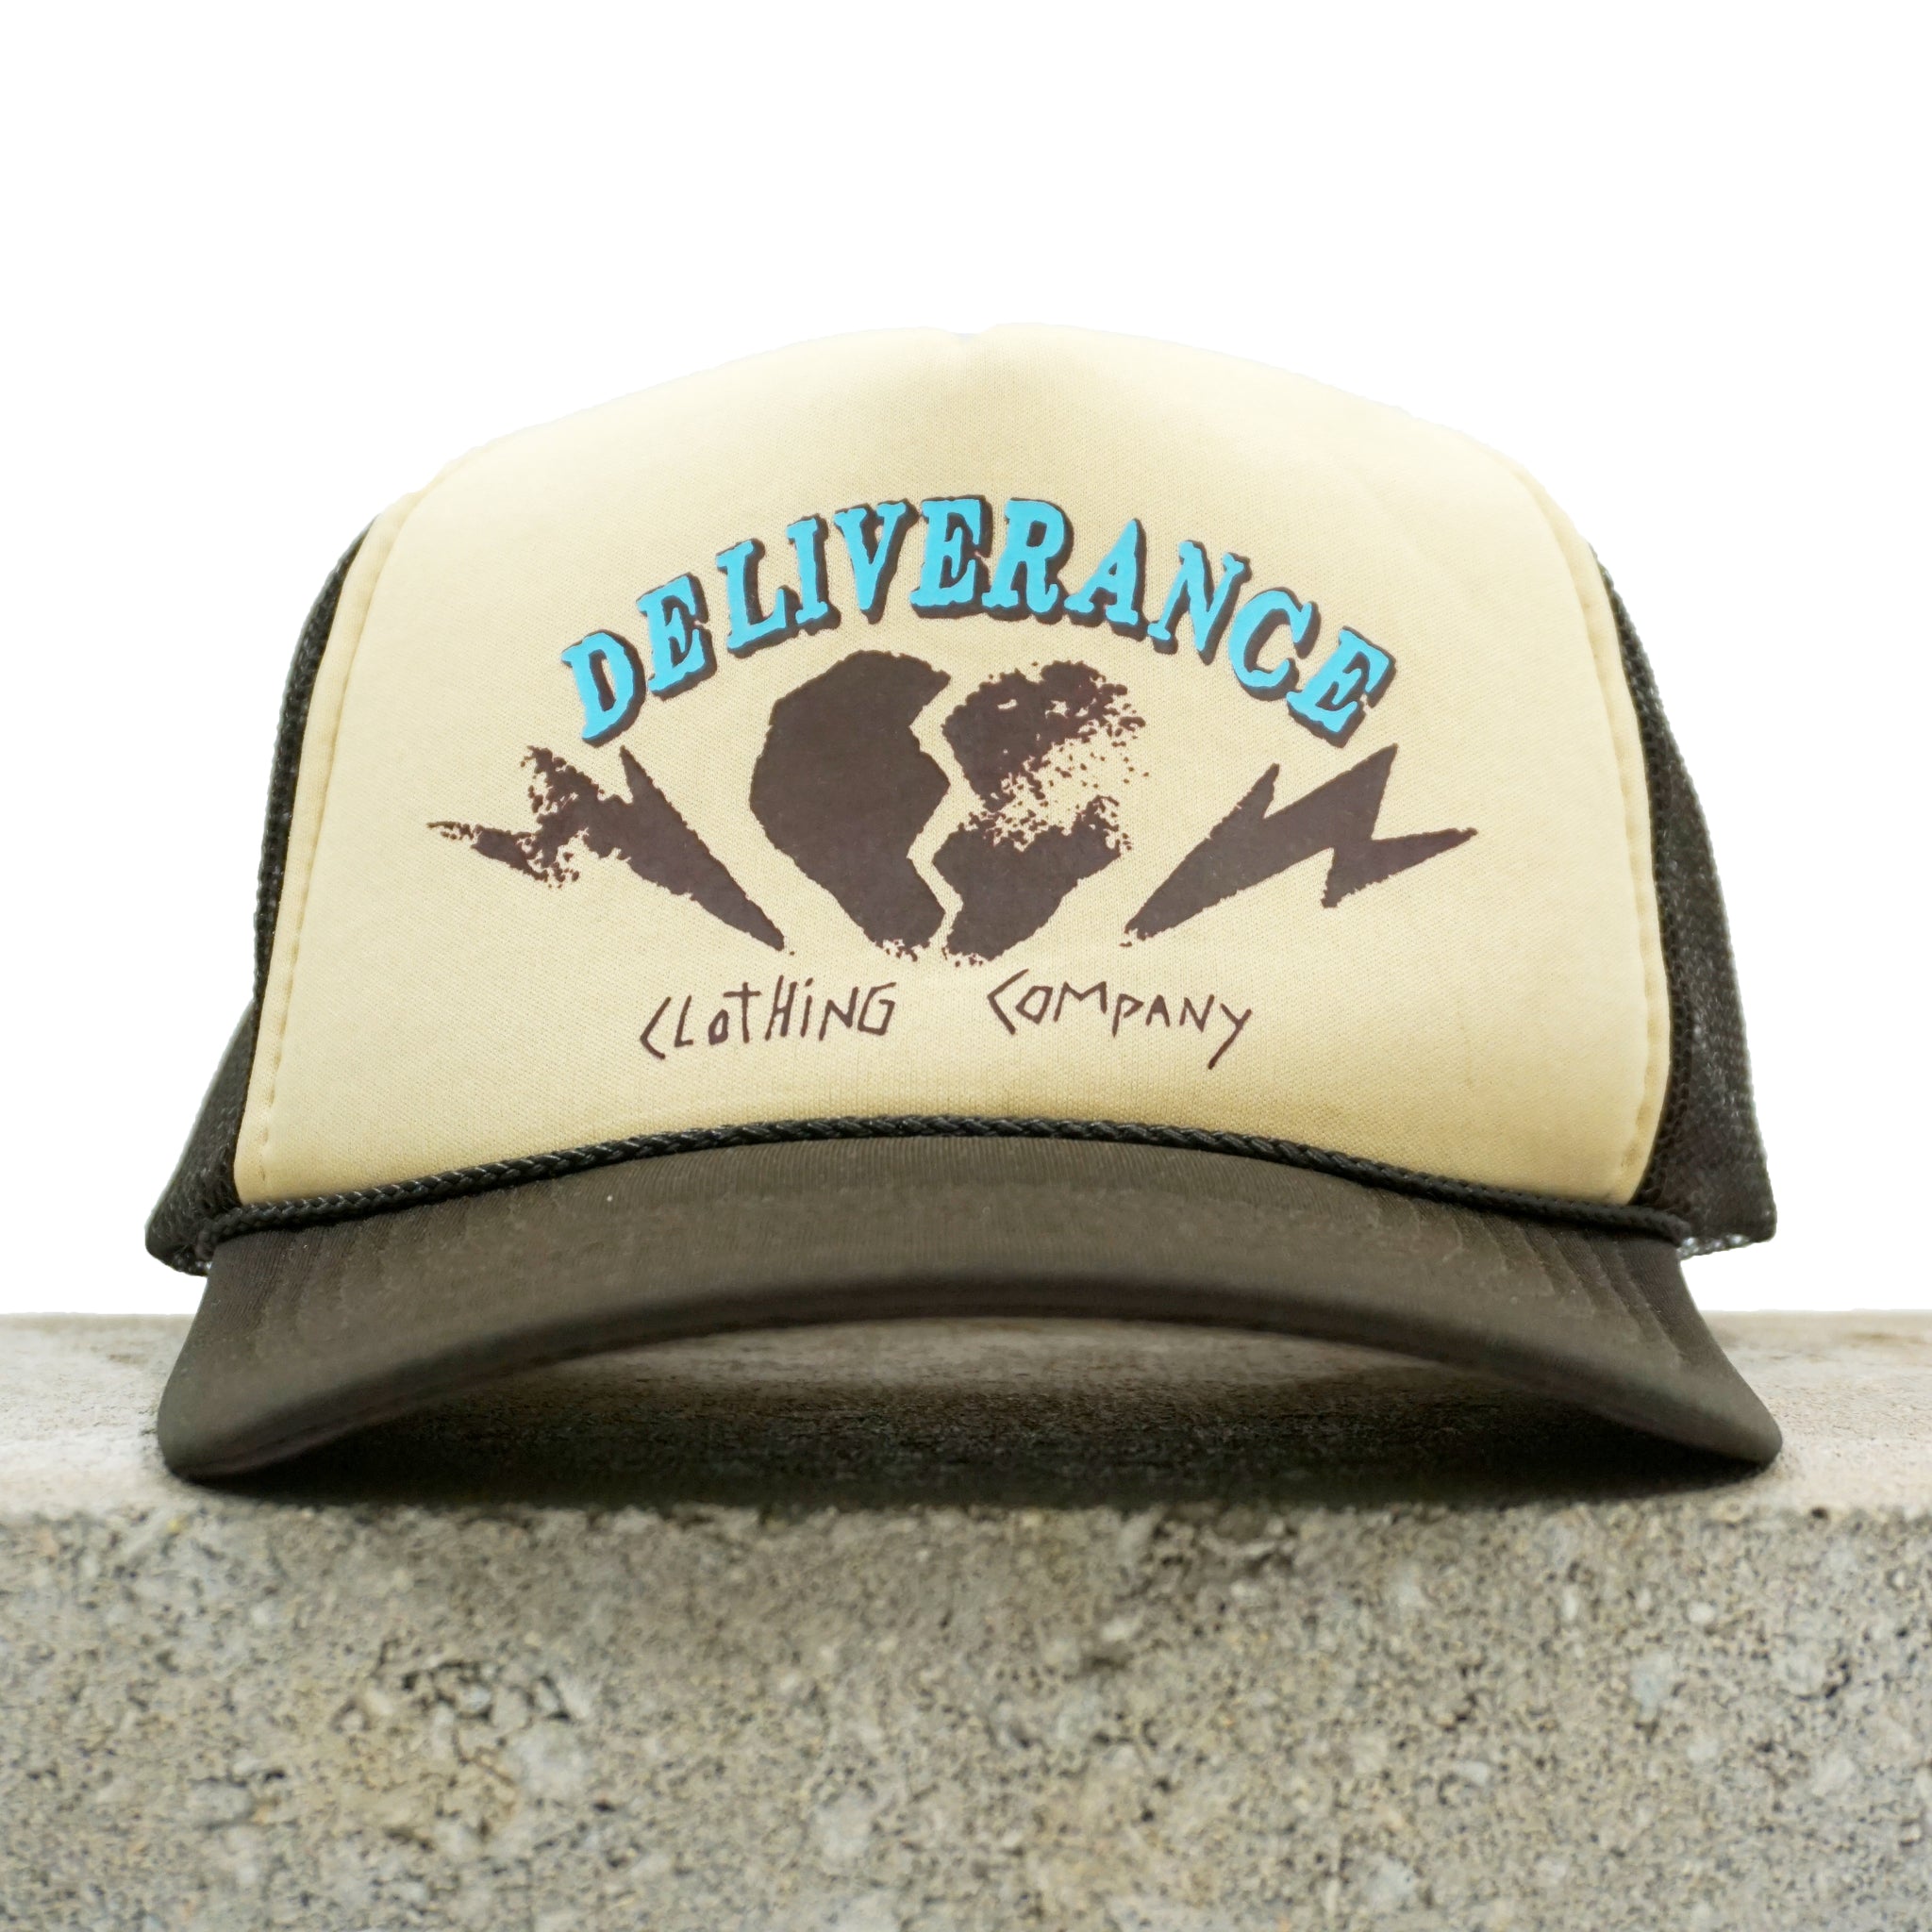 Deliverance Clothing Company - Trucker Hat (Tan/Brown)